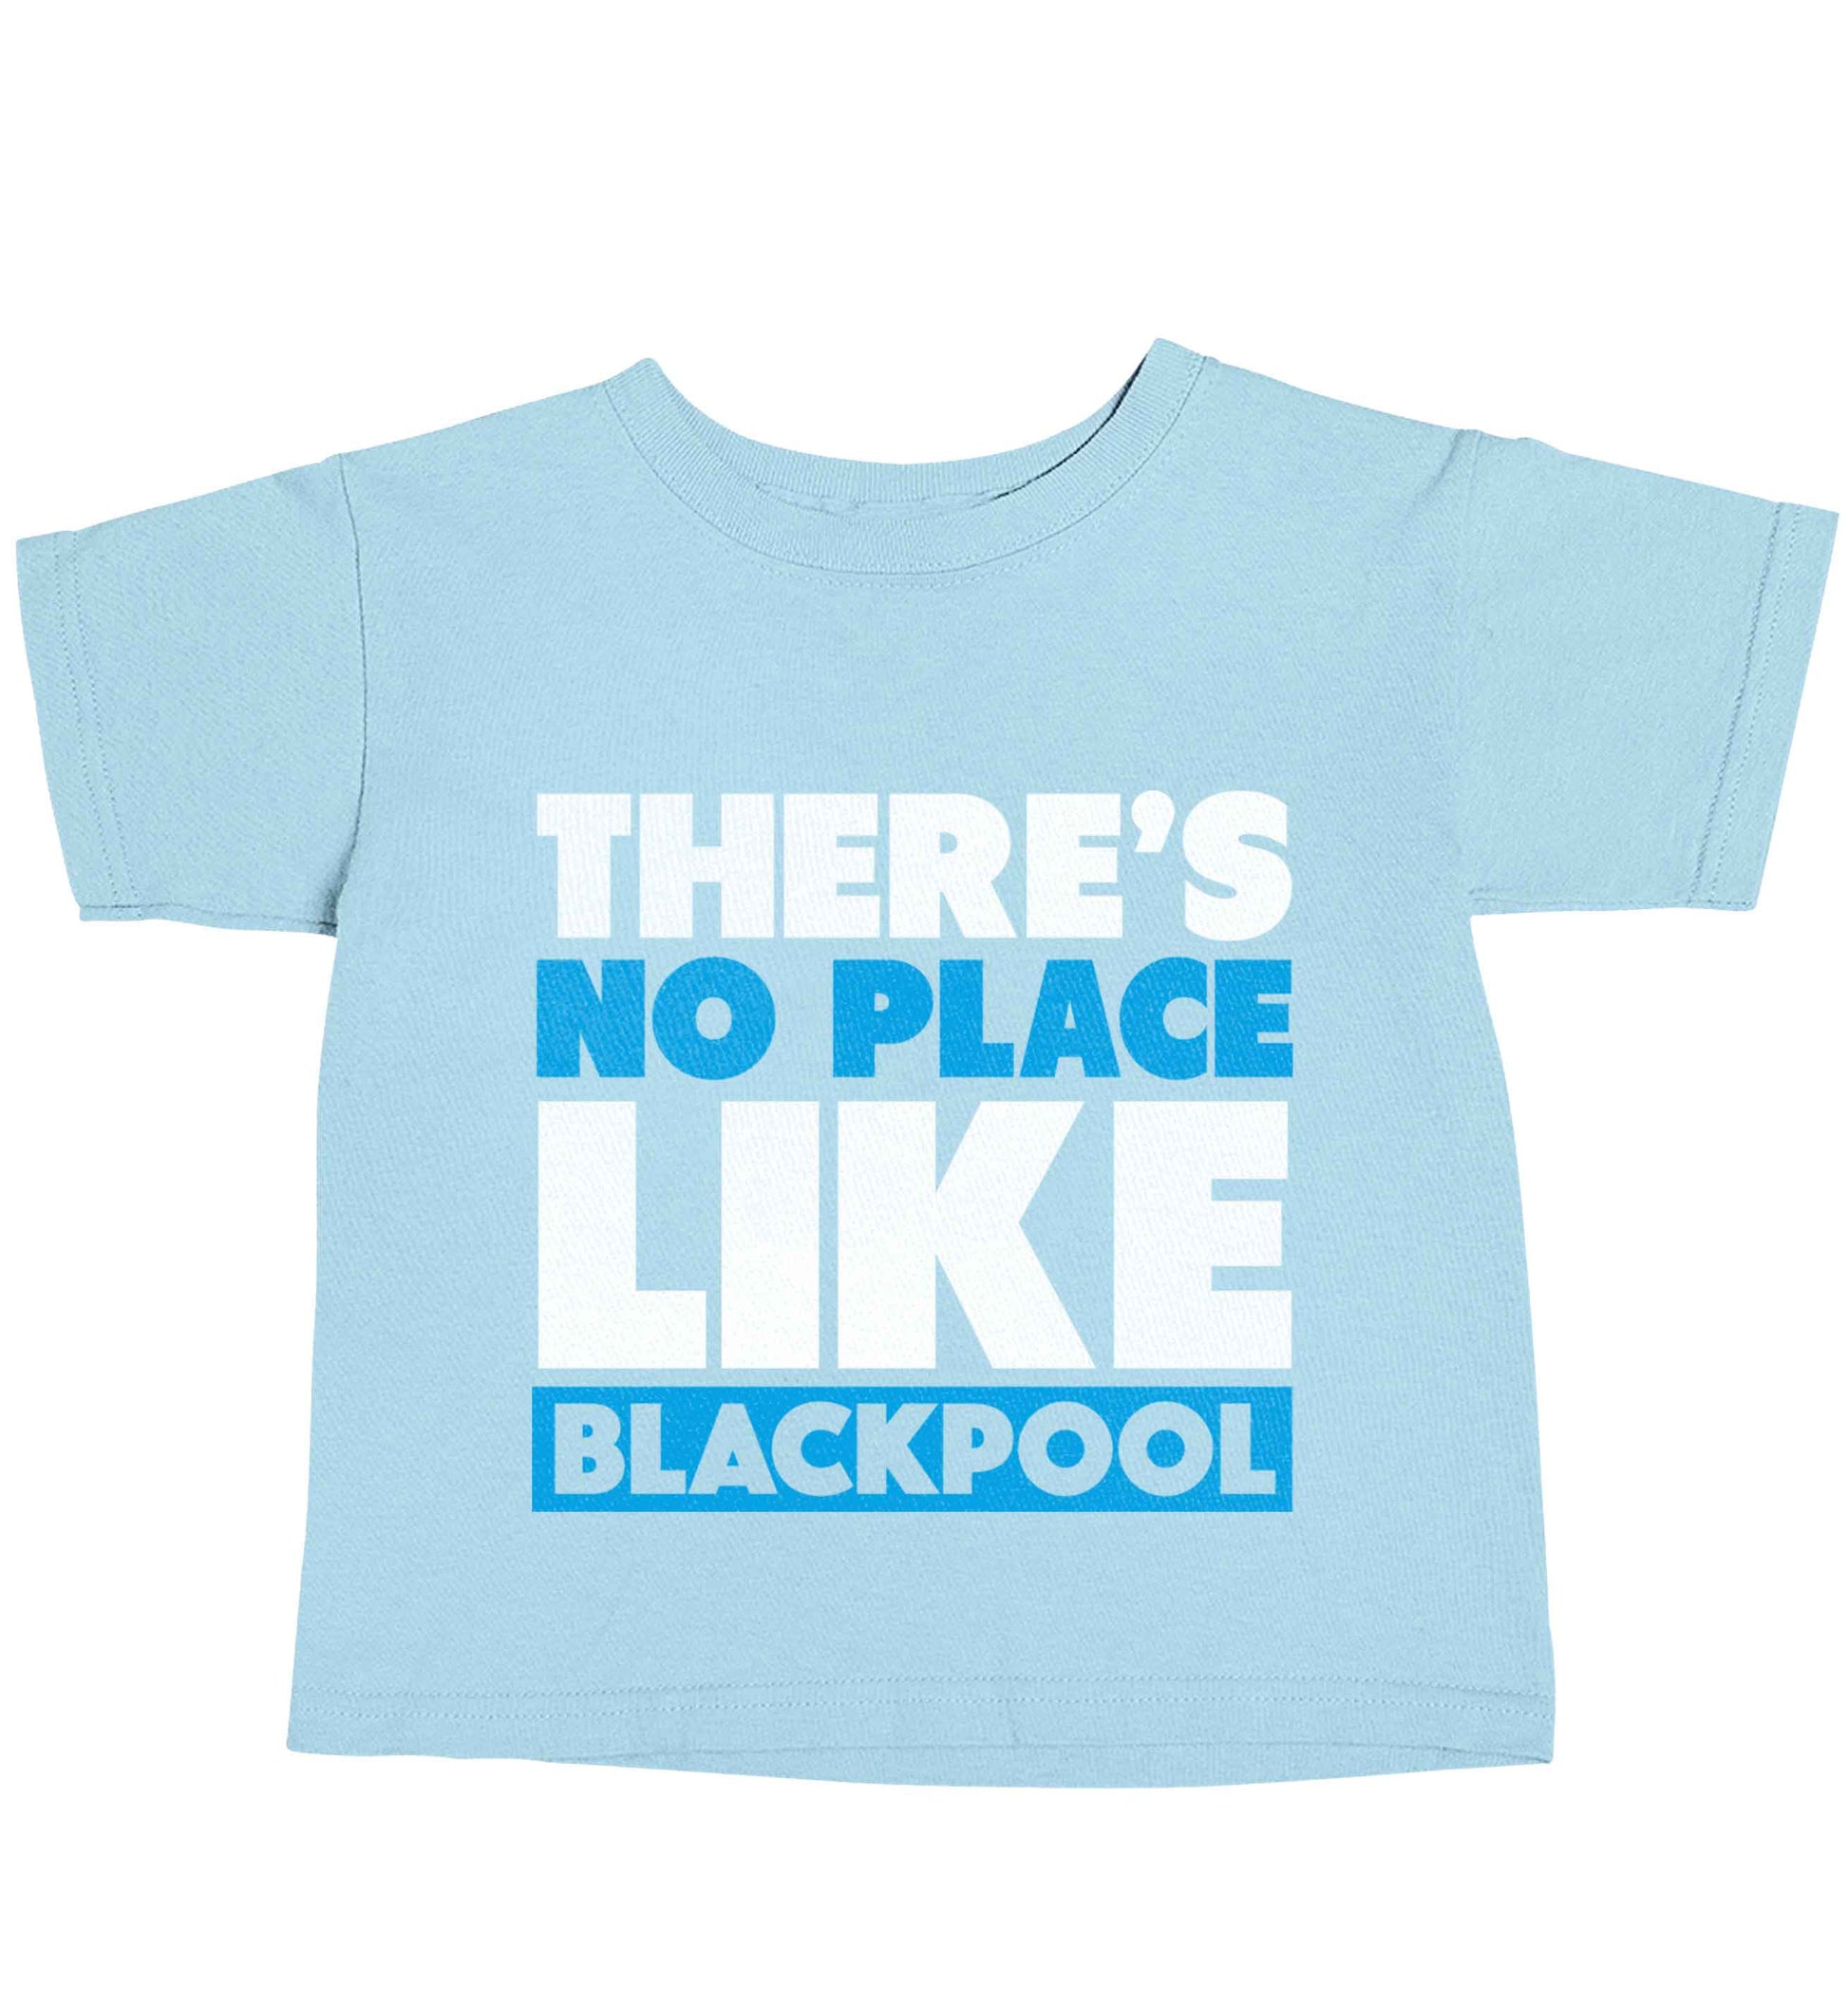 There's no place like Blackpool light blue baby toddler Tshirt 2 Years